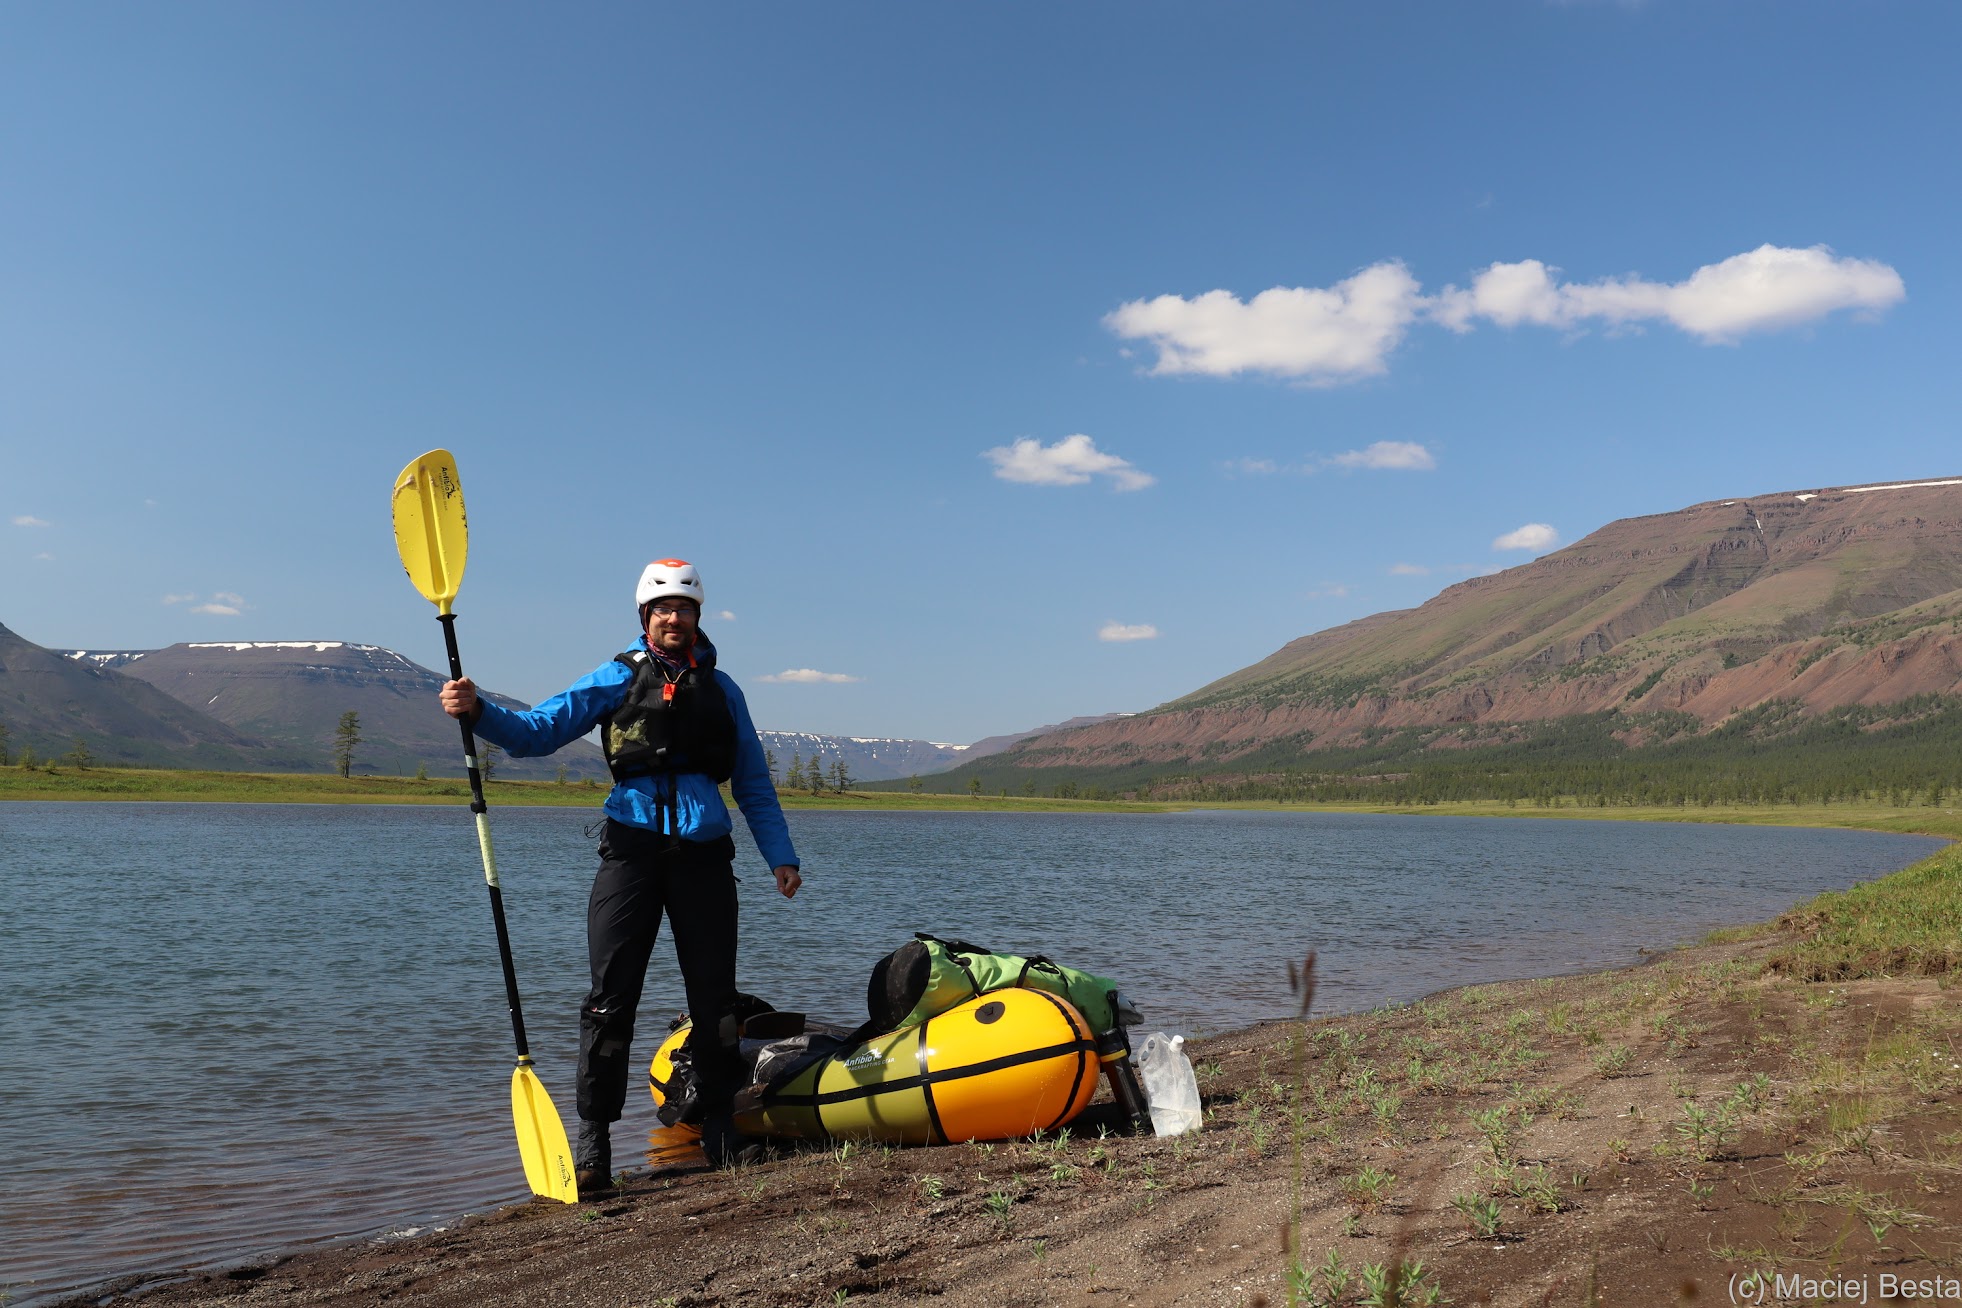 Ultralight packrafting in remote mountains